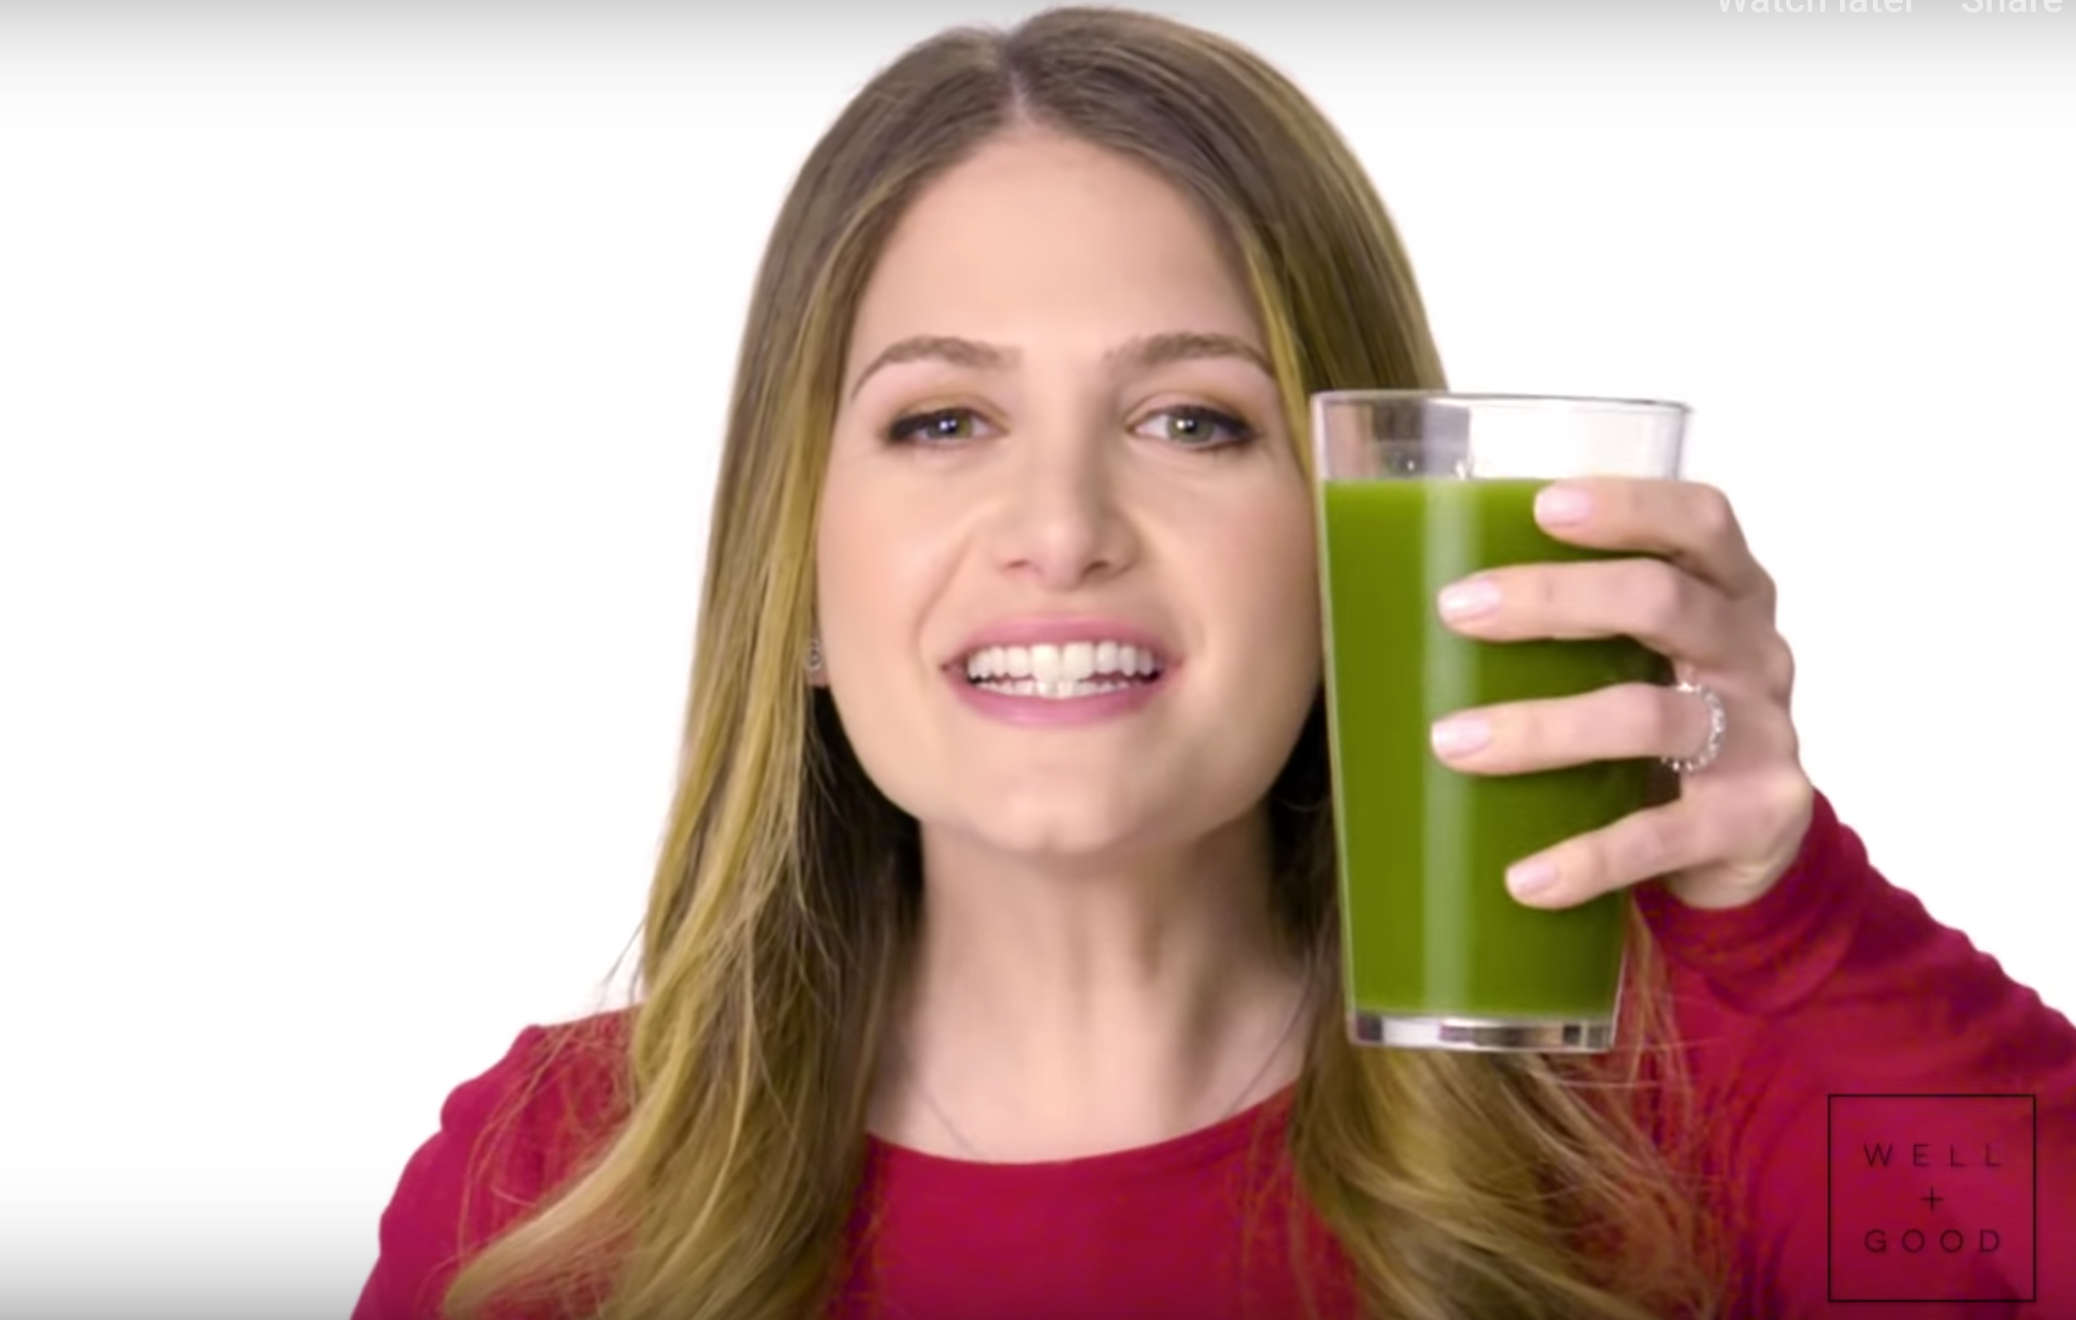 IS GREEN JUICE REALLY THE END-ALL, BE-ALL OF WELLNESS?